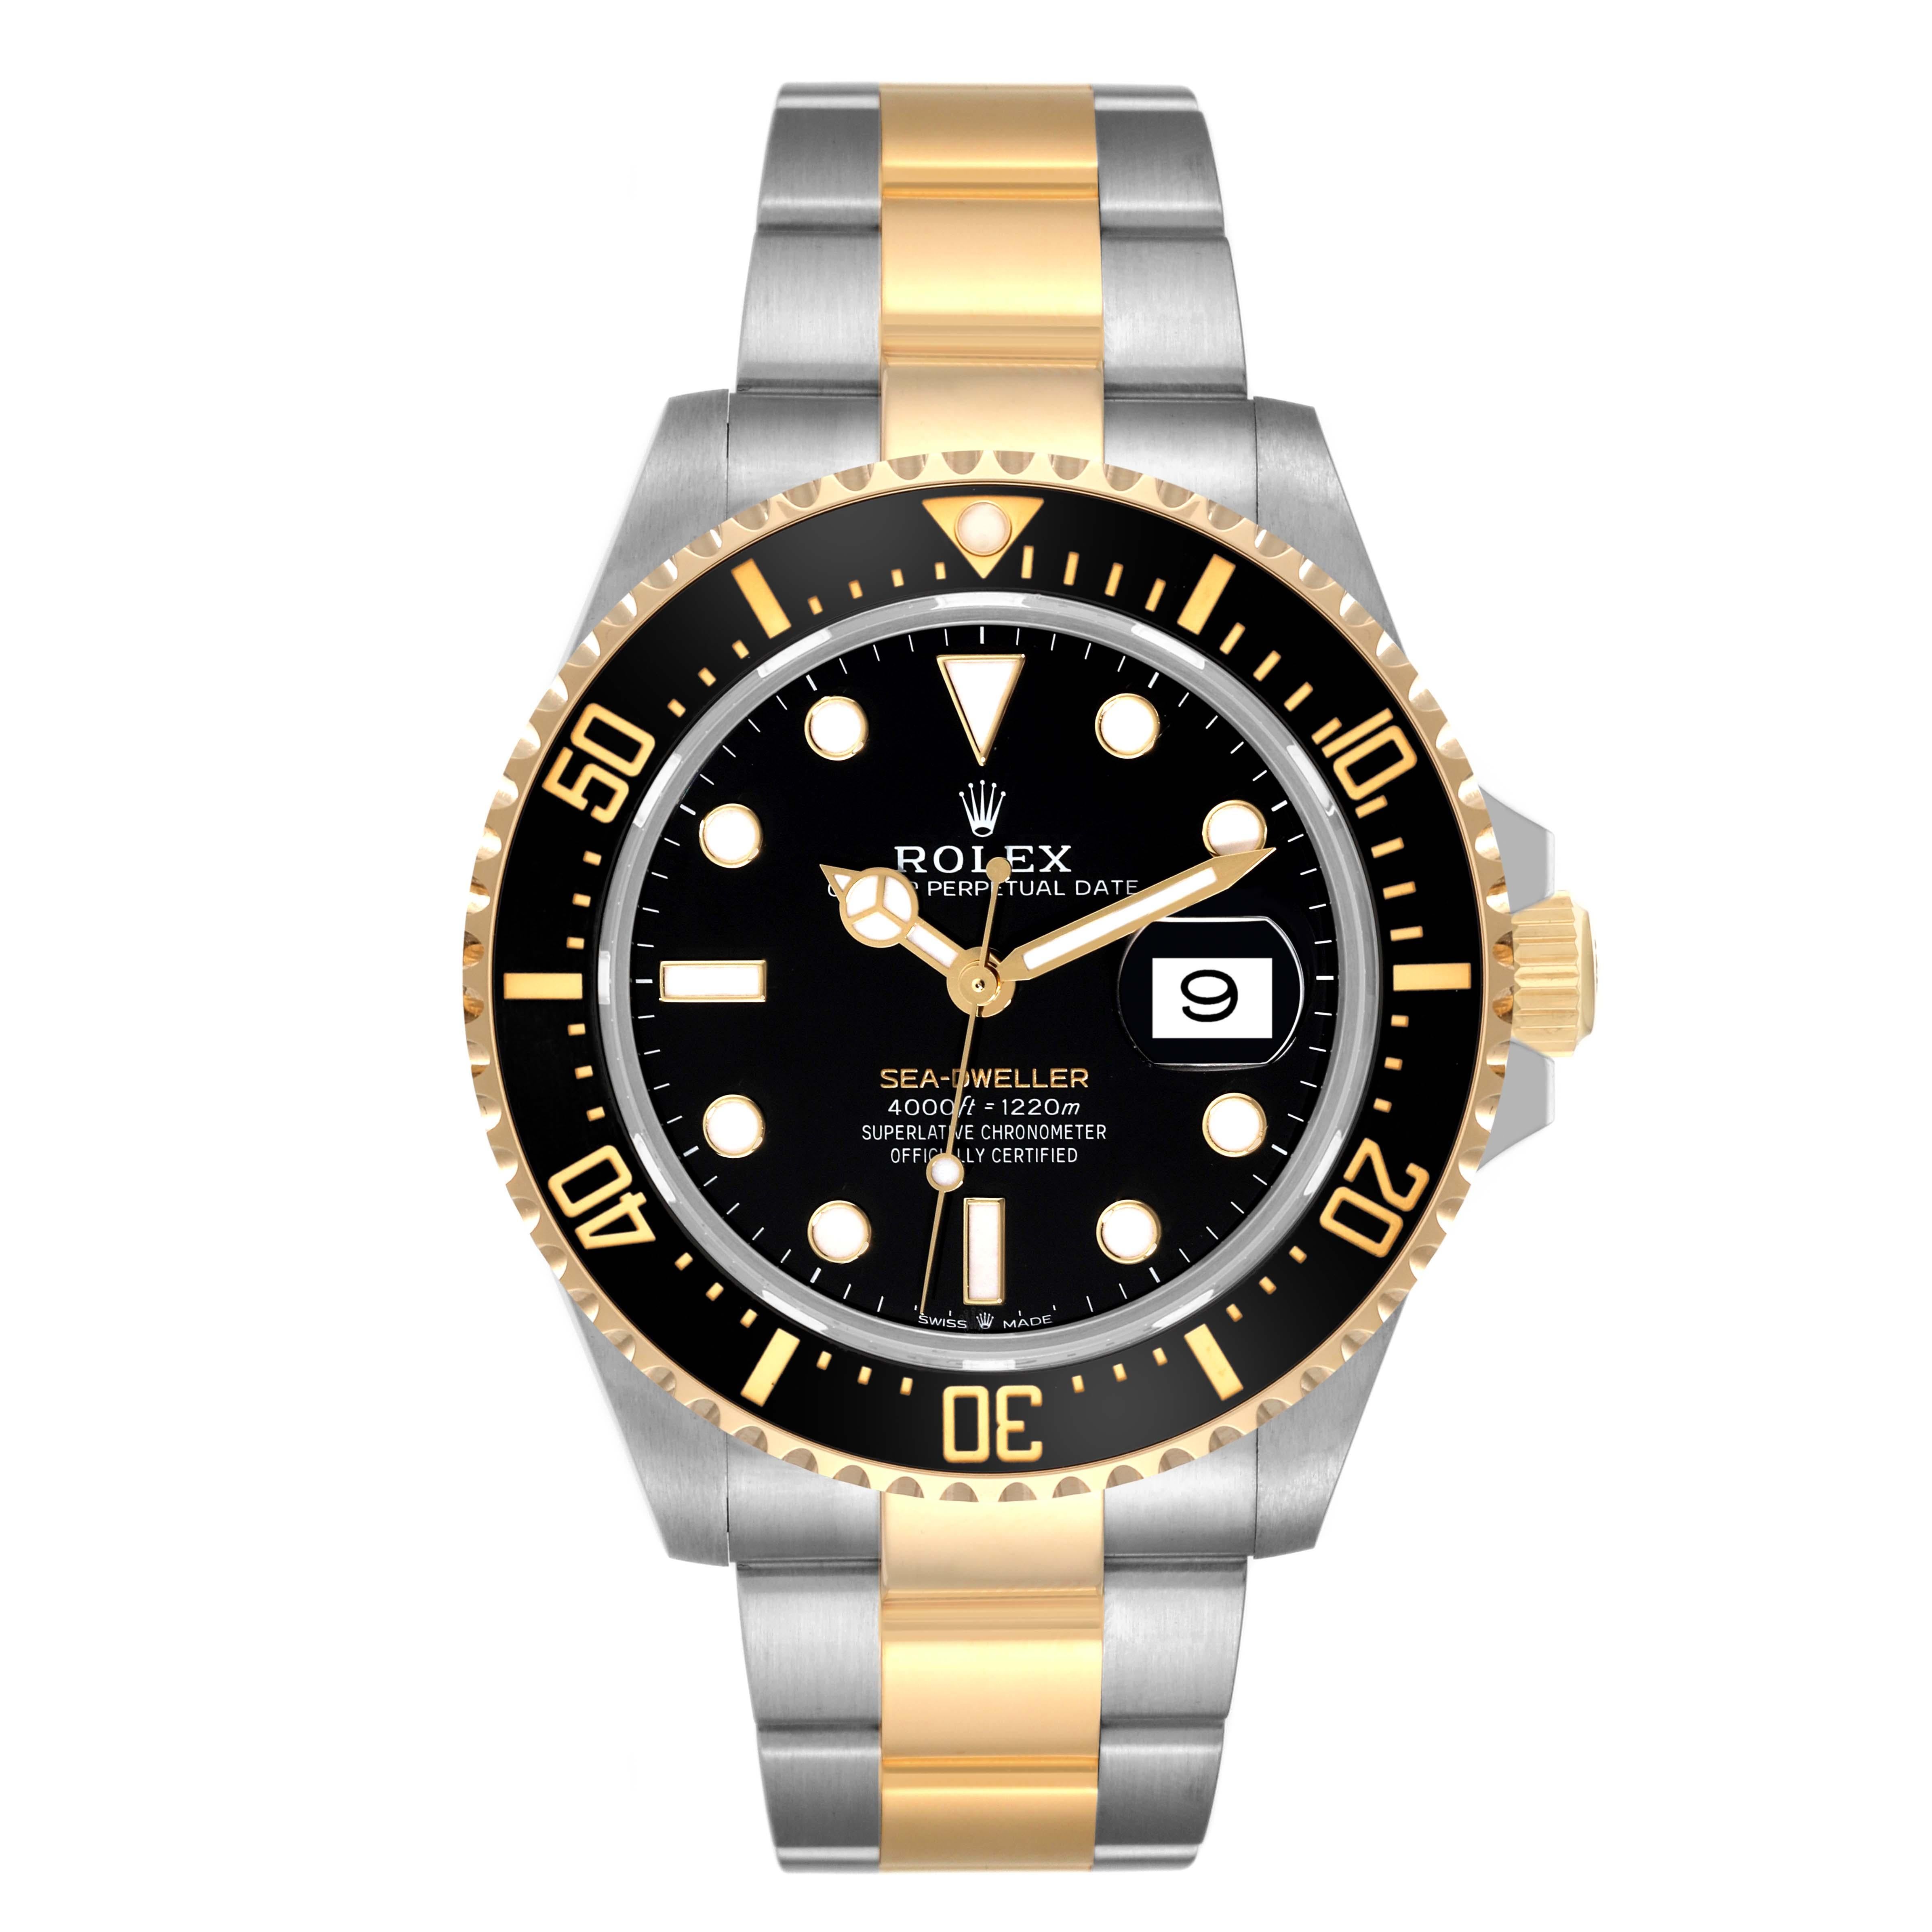 Rolex Seadweller Black Dial Steel Yellow Gold Mens Watch 126603 Box Card. Officially certified chronometer automatic self-winding movement. Stainless steel and 18K yellow gold oyster case 43 mm in diameter. Rolex logo on the crown. Special